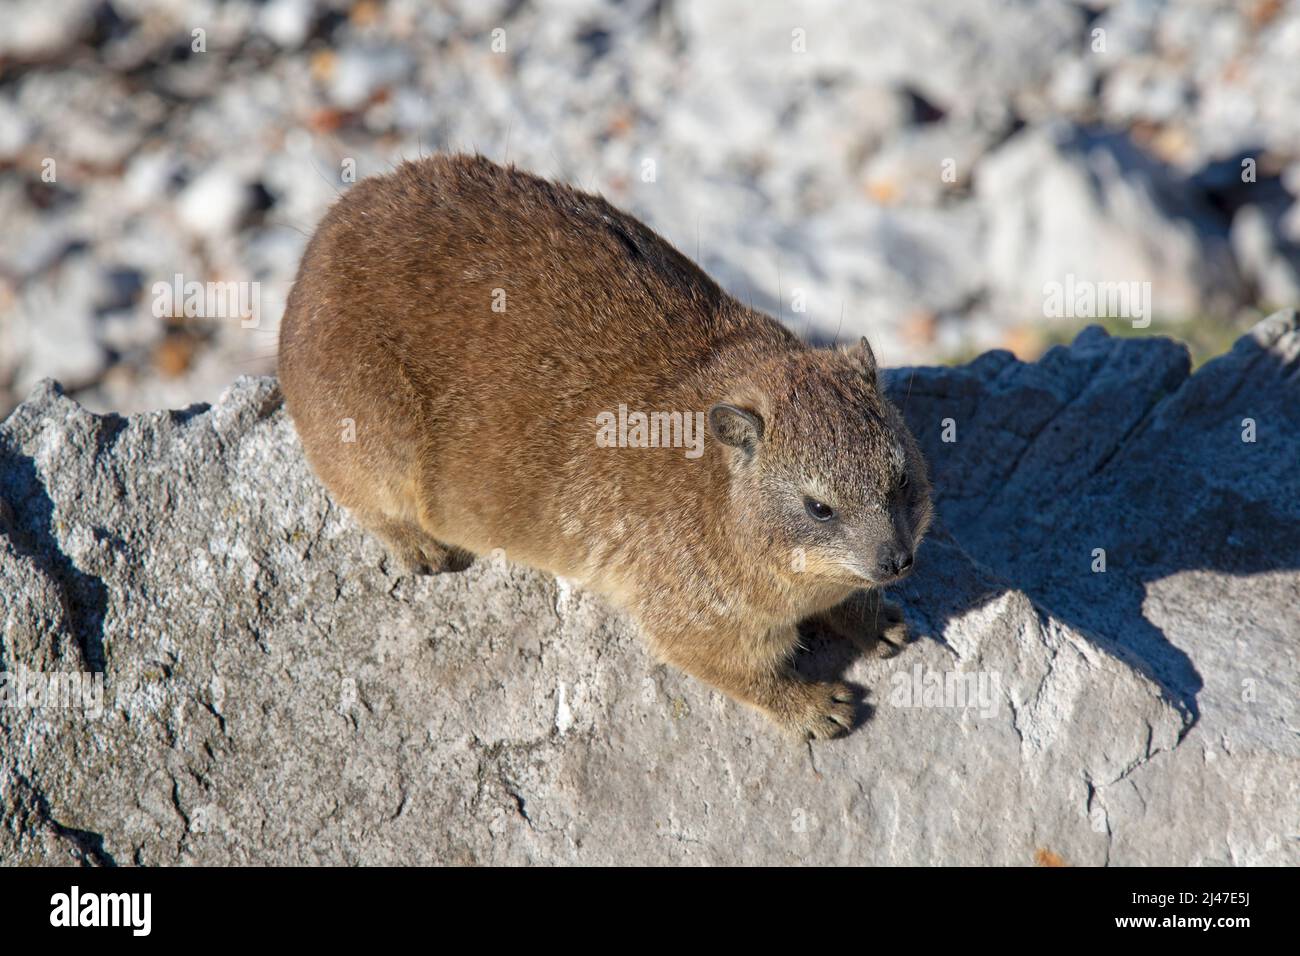 Hyrax, Procavia Capensis, sometimes known as  Dassies. On rocks in the coastline of the Western Cape in South Africa. Stock Photo